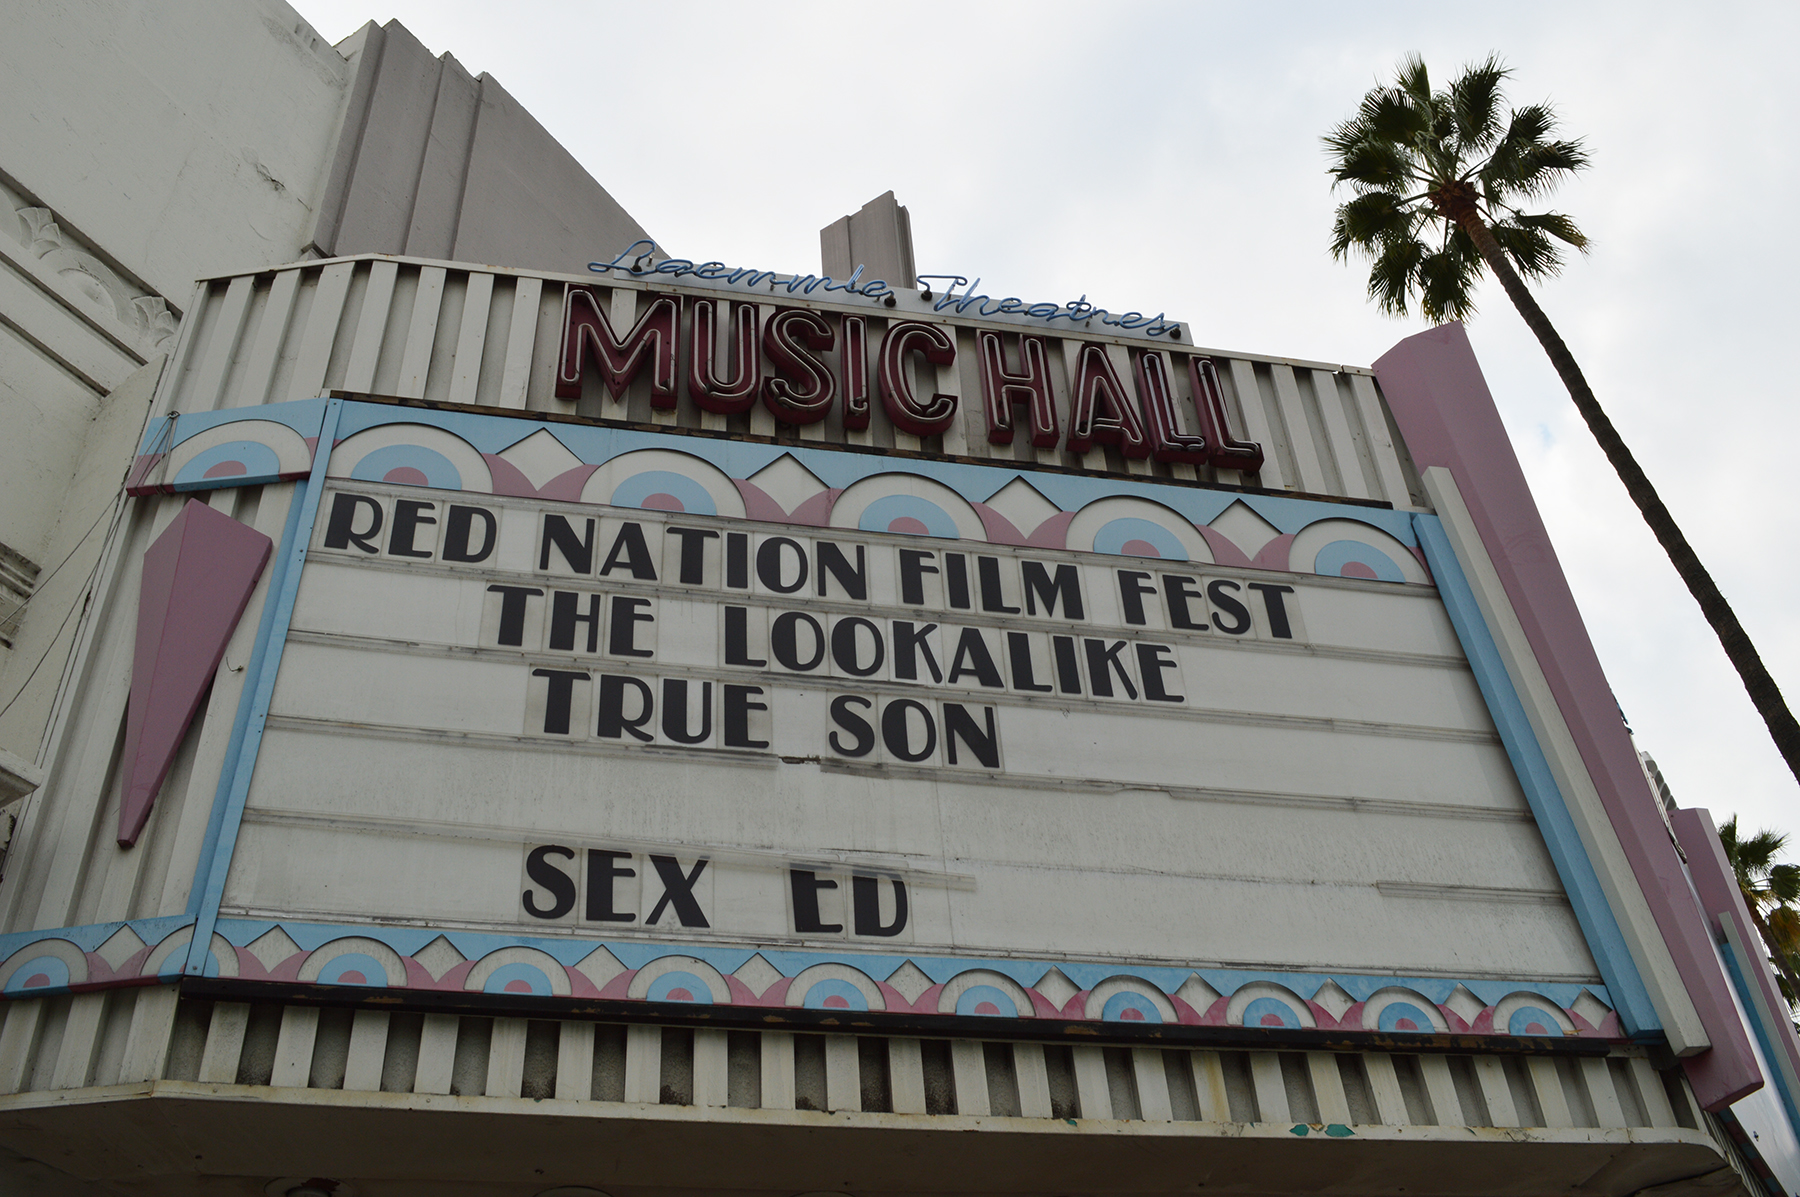 Red Nation Film Festival 2014 Beverly Hills, CA.